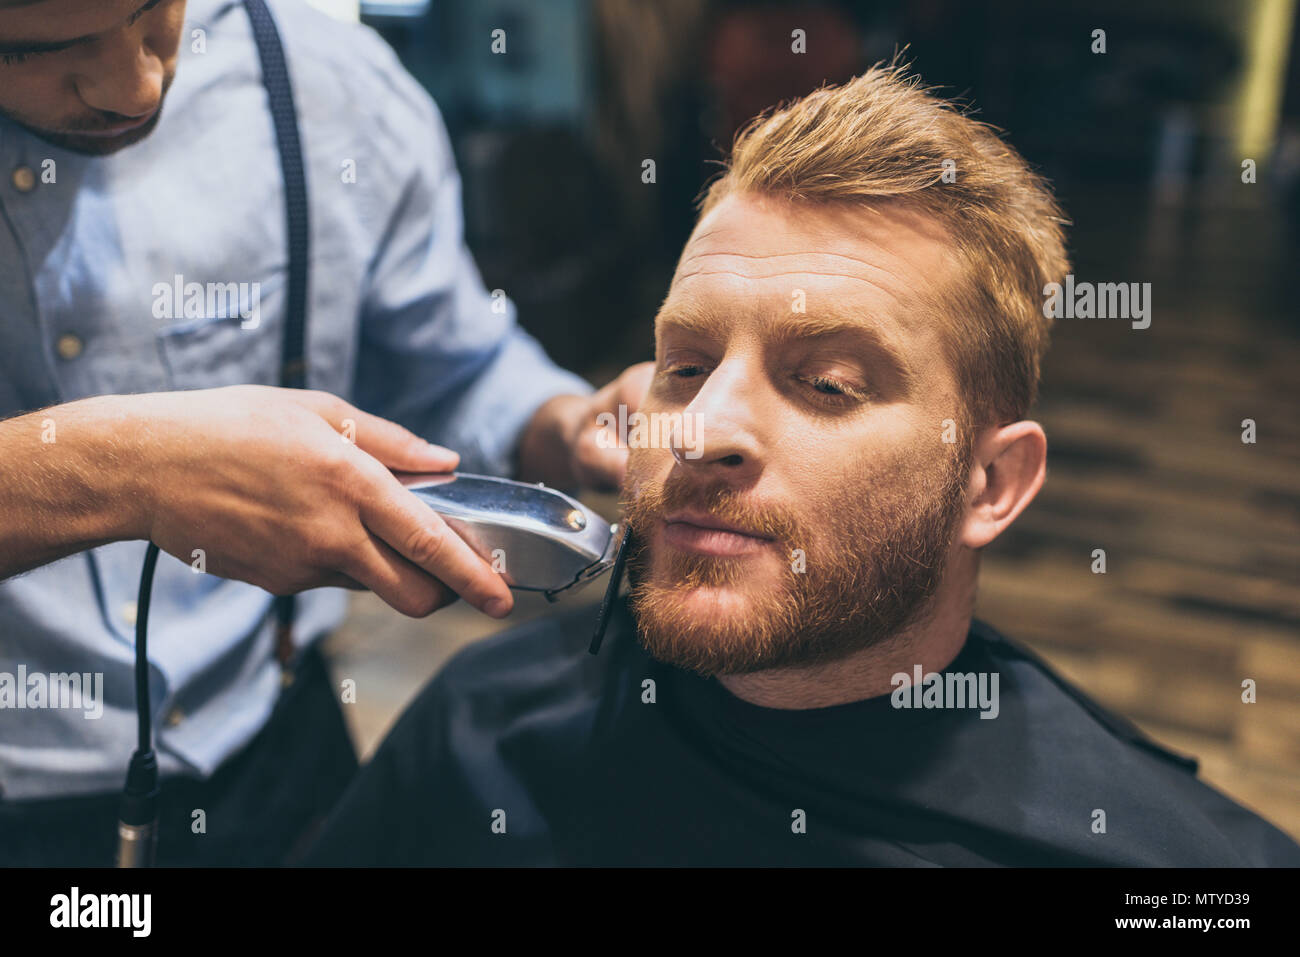 Male barber trimming customers beard in barber shop Stock Photo